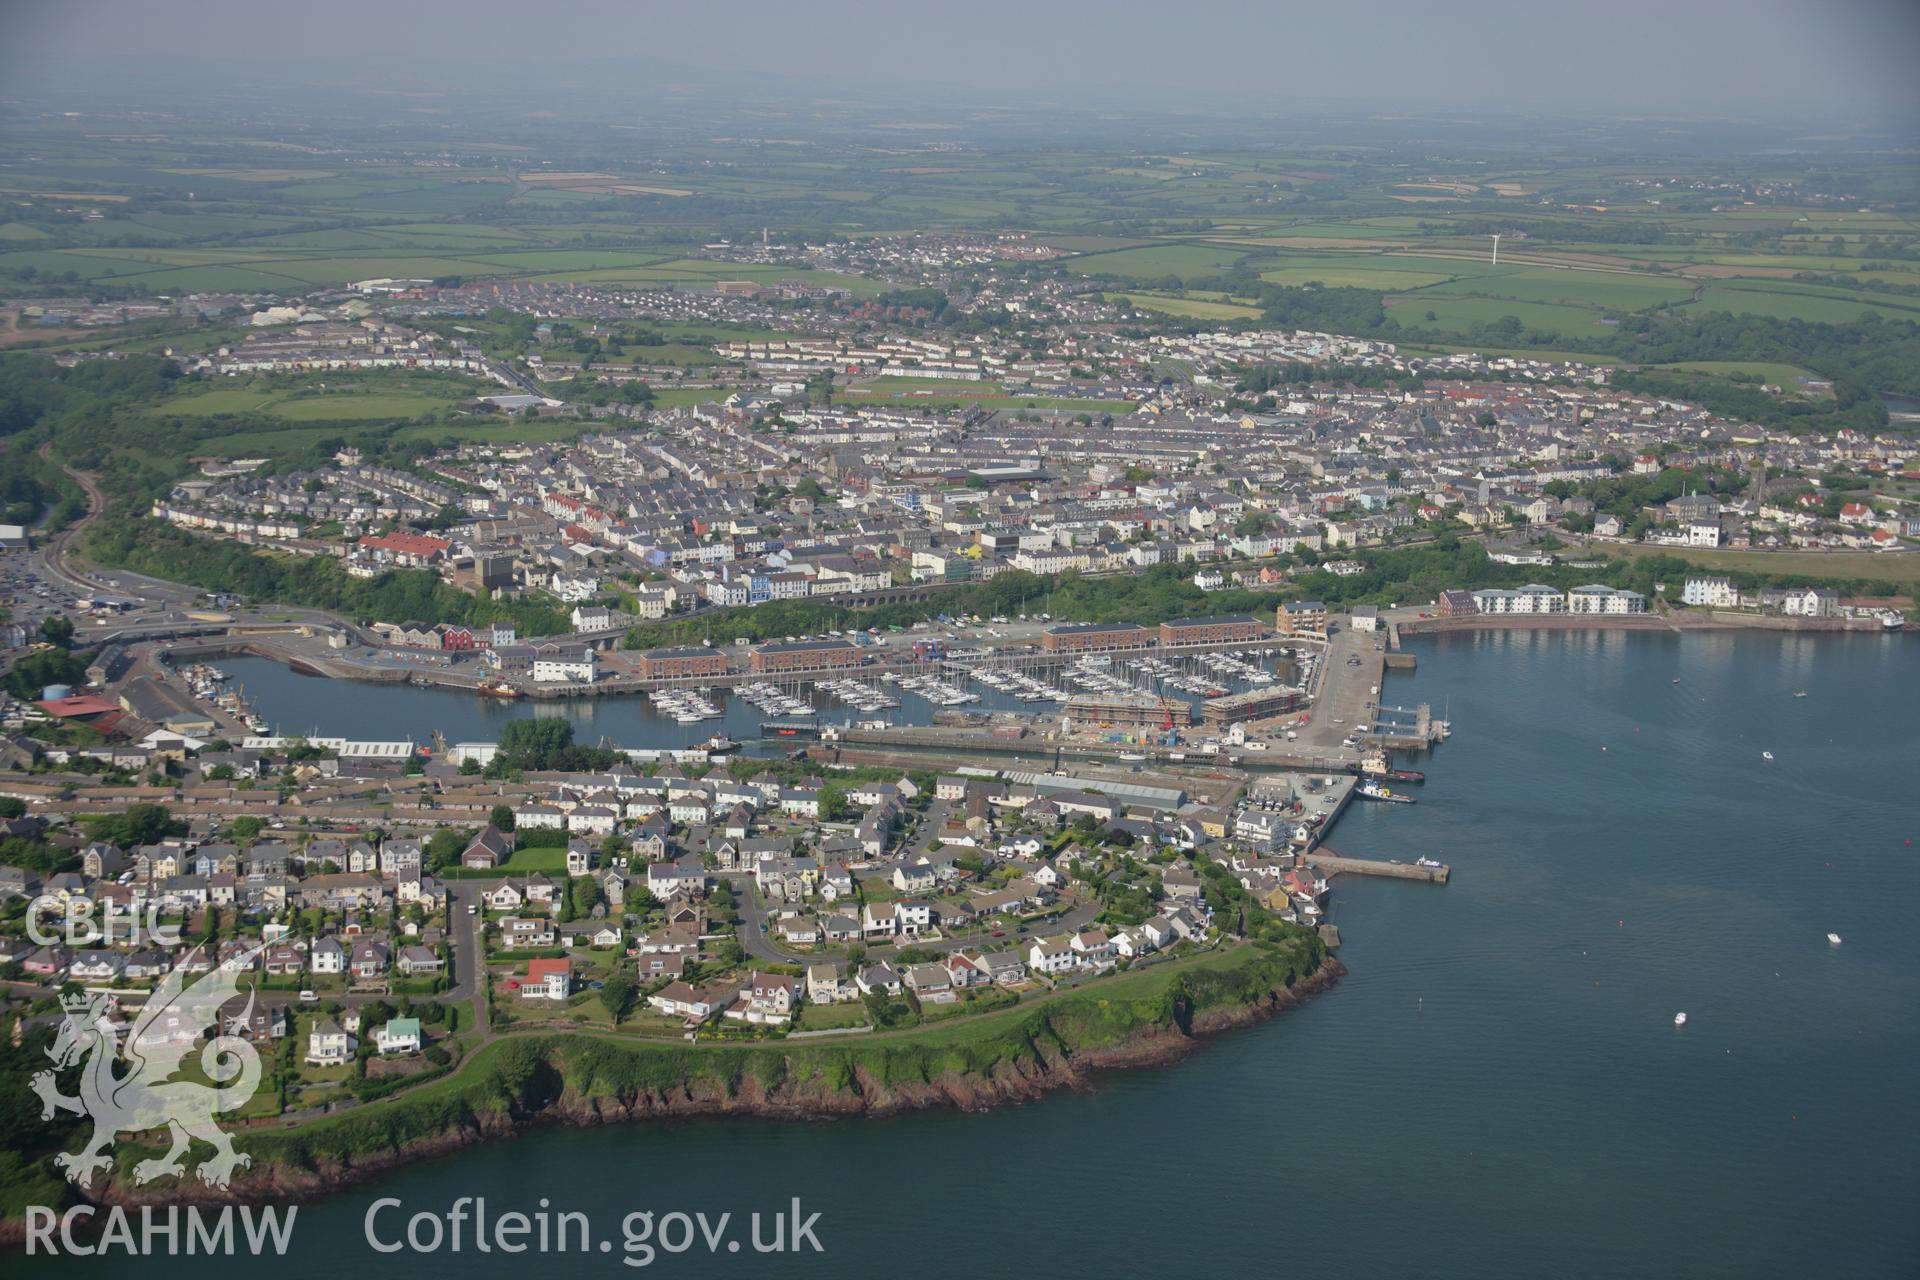 RCAHMW colour oblique aerial photograph of Milford Haven, viewed from the south-west. Taken on 08 June 2006 by Toby Driver.